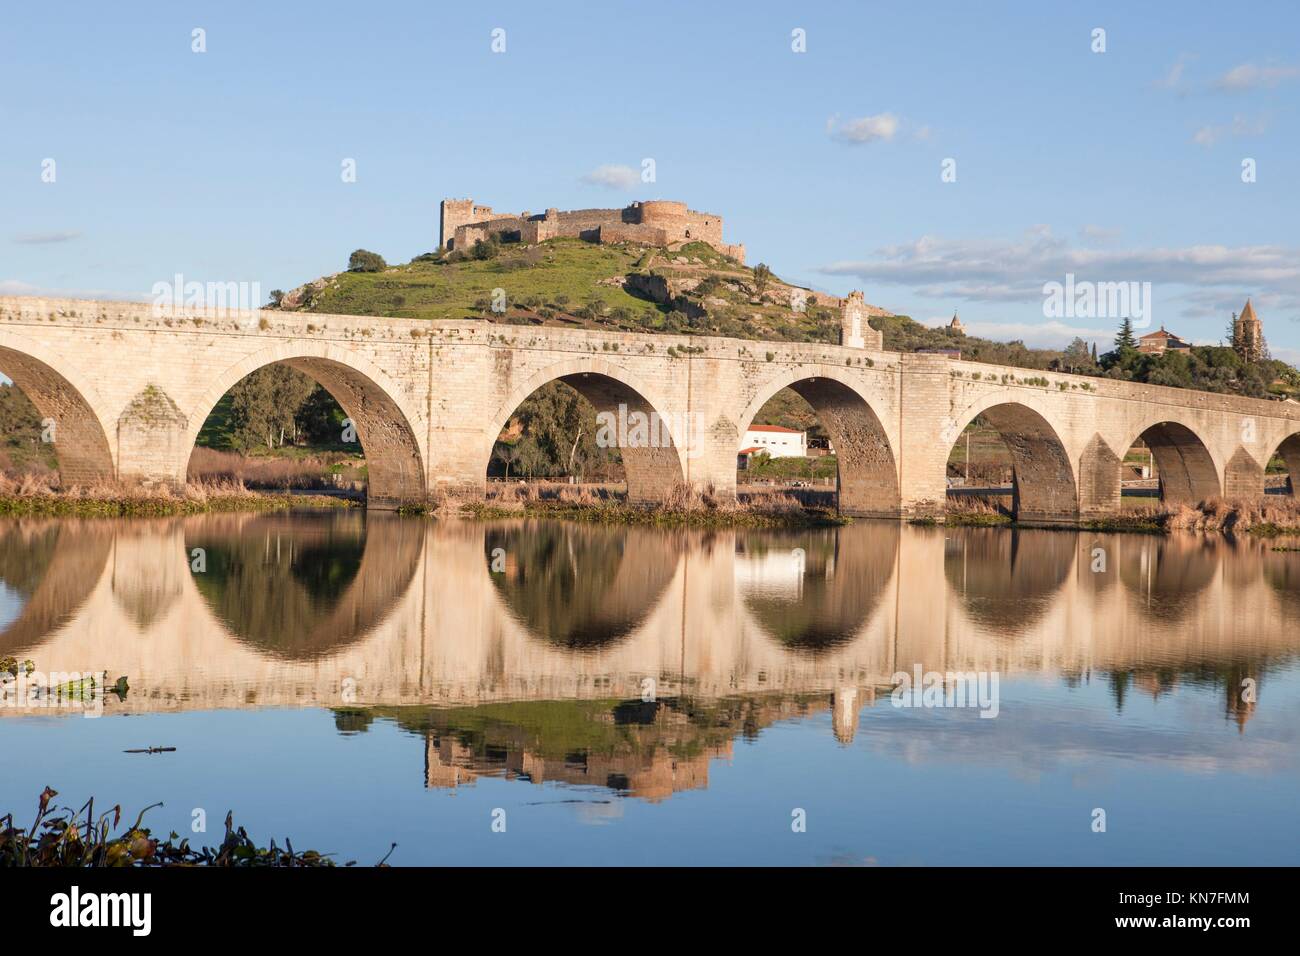 Medellin old bridge and castle from Guadiana riverside, Spain. Stock Photo